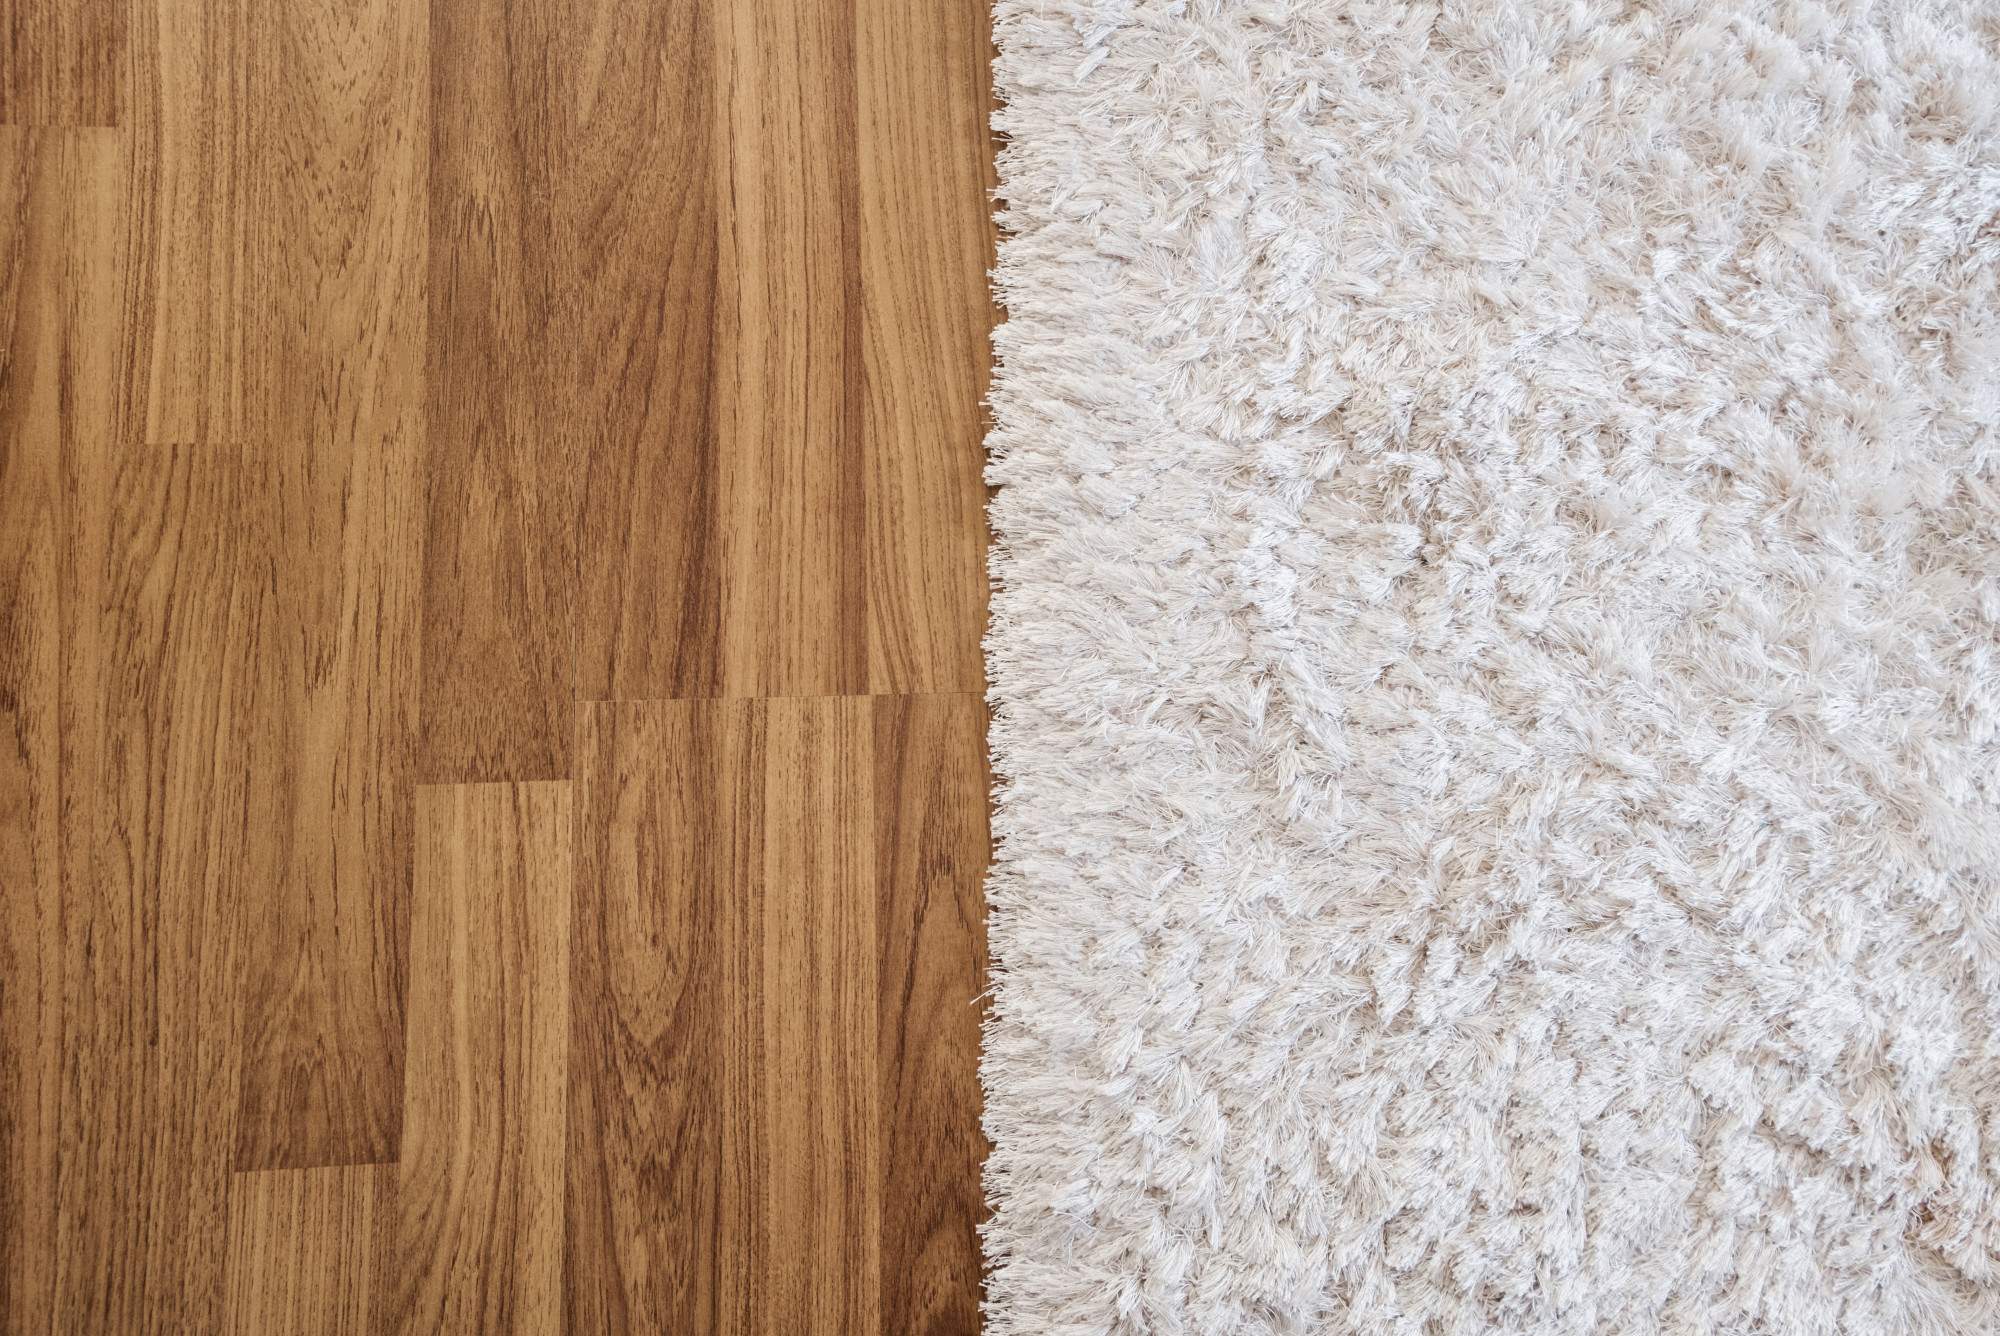 What Are the Best Flooring Materials for Your House?